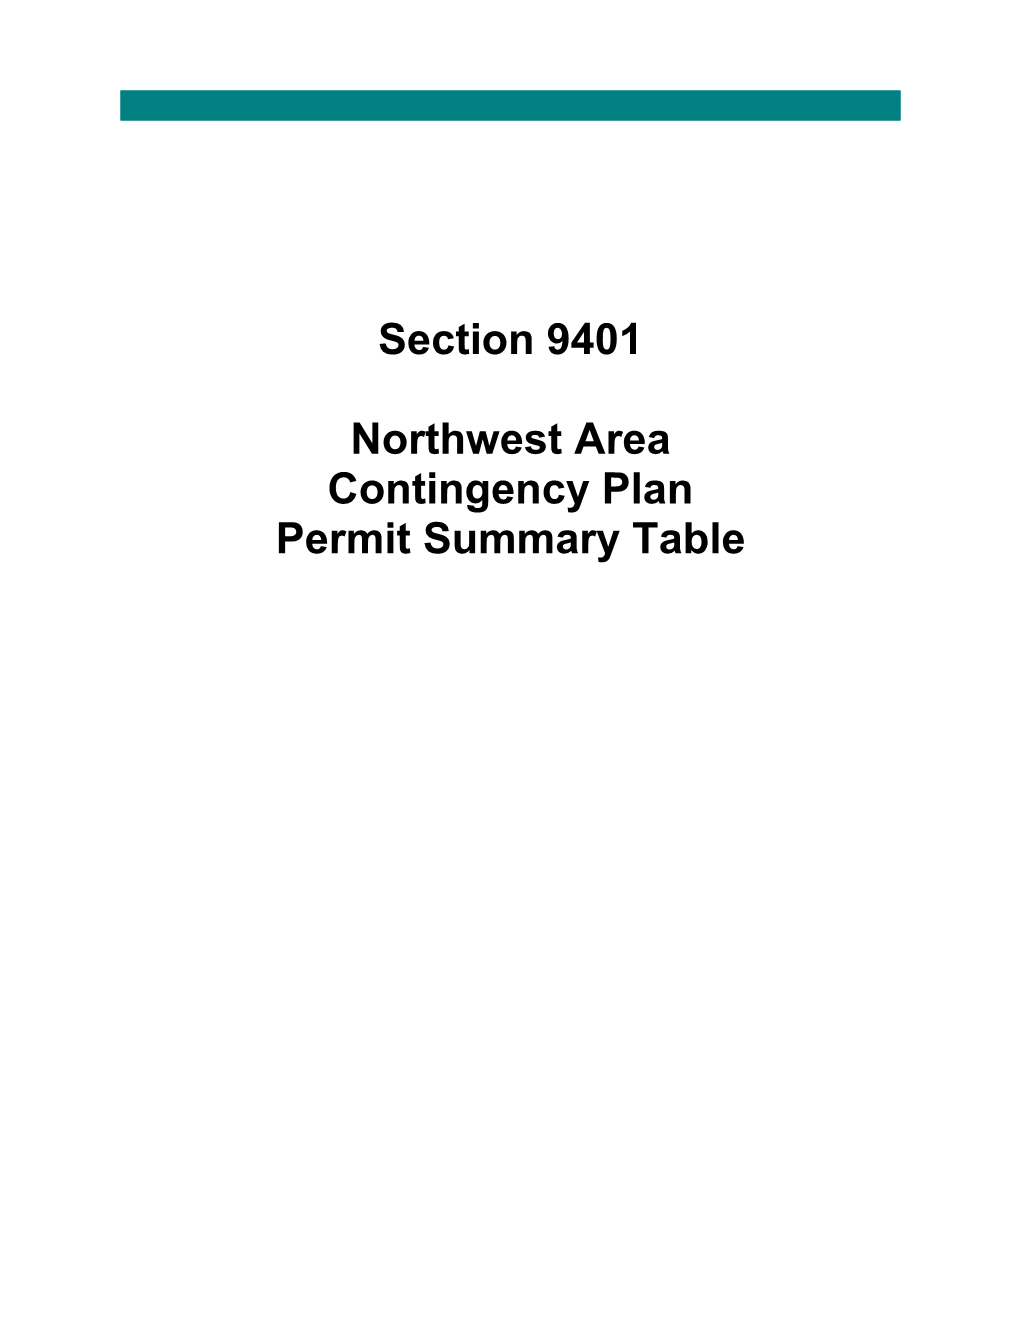 Section 9401 Northwest Area Contingency Plan Permit Summary Table